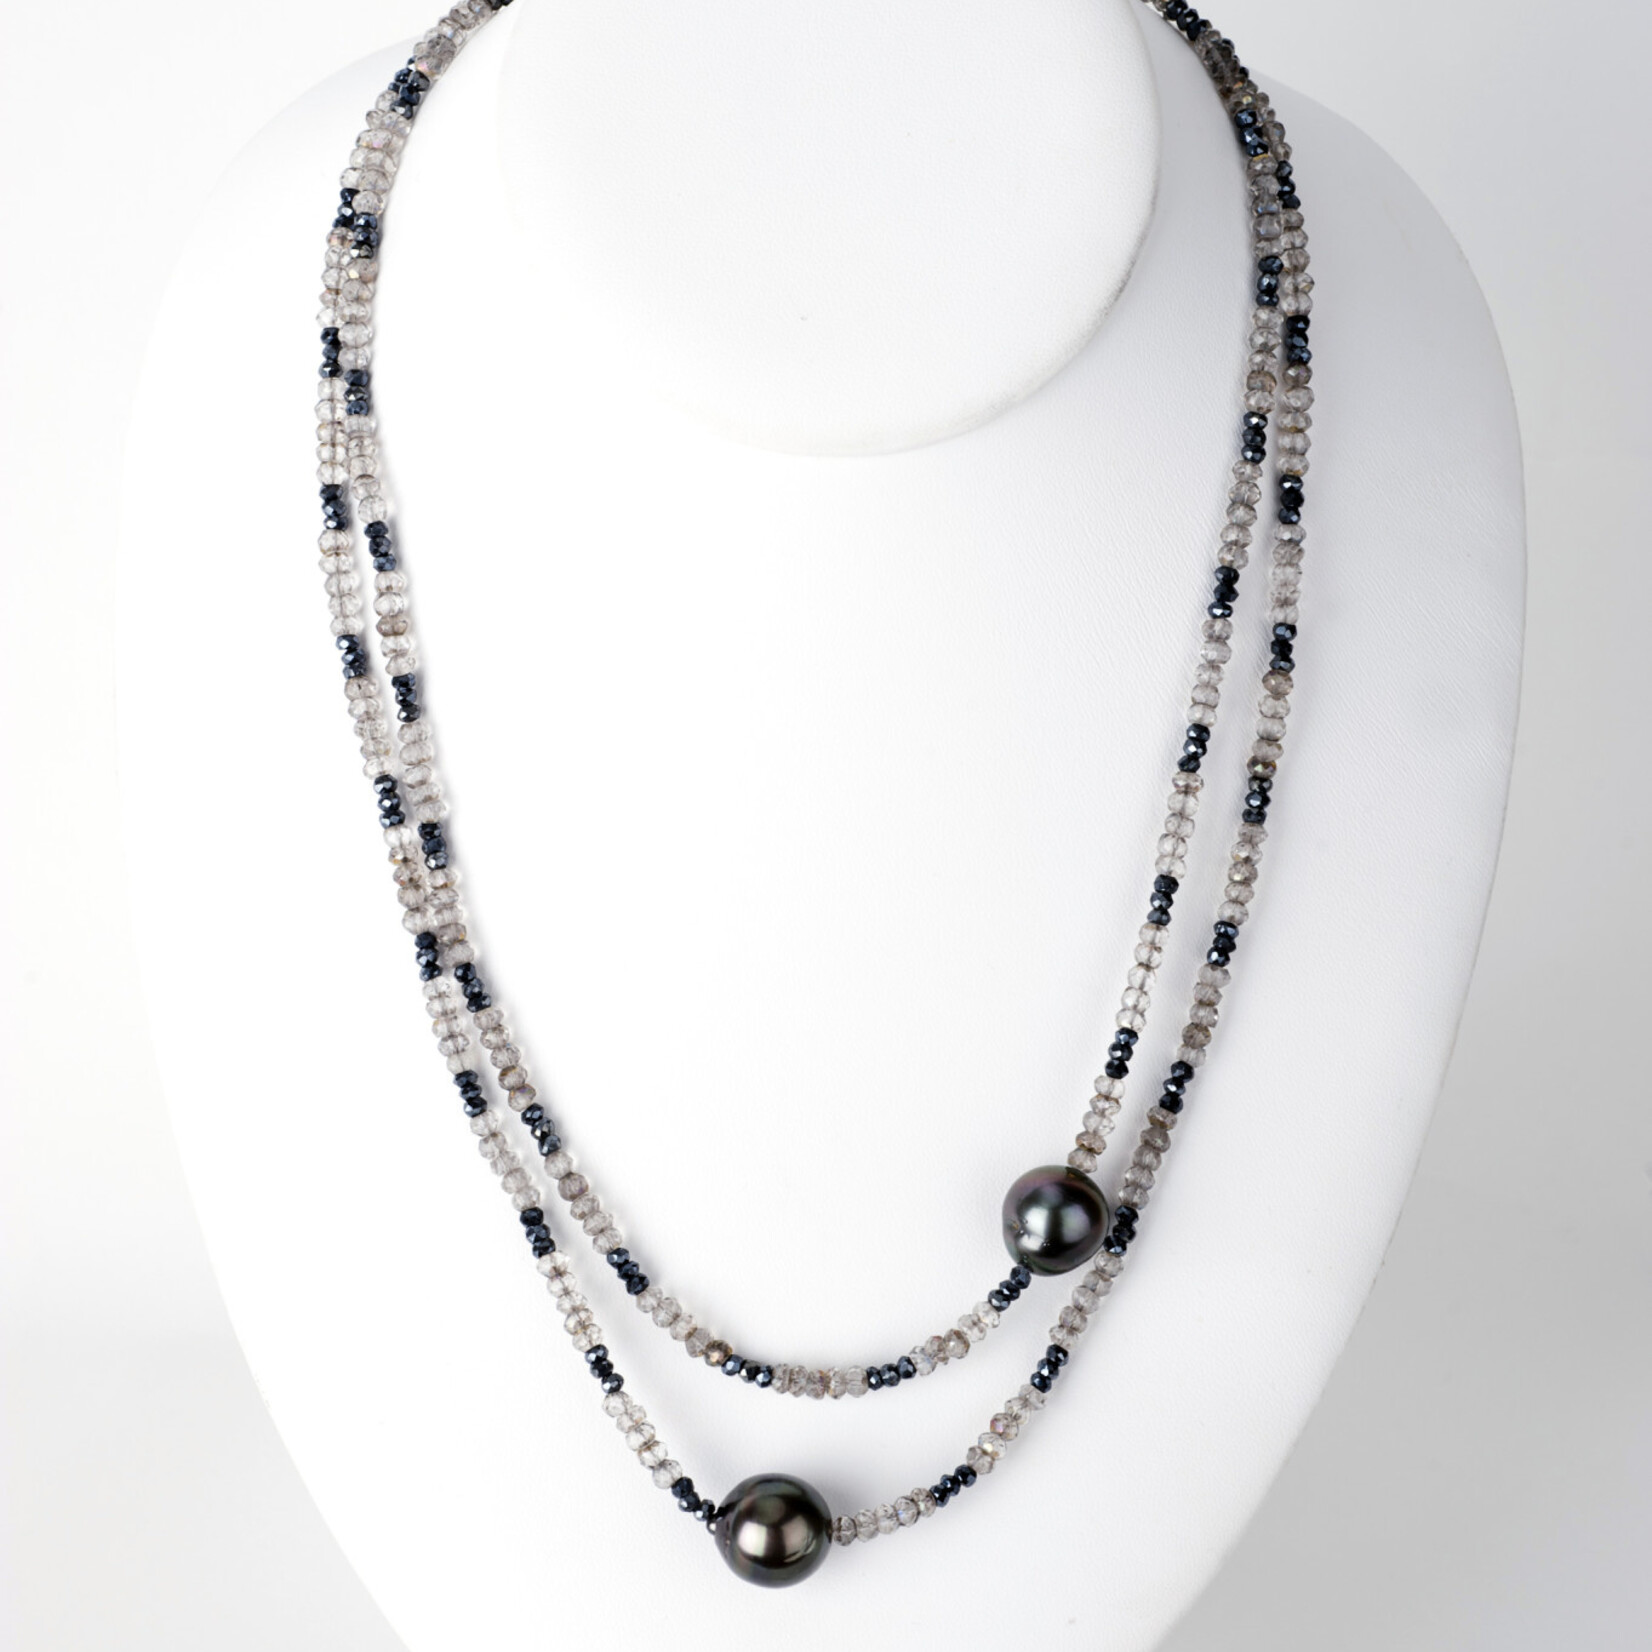 Mina Danielle Labradorite and Hematite Necklace with 2 Tahitian Pearls